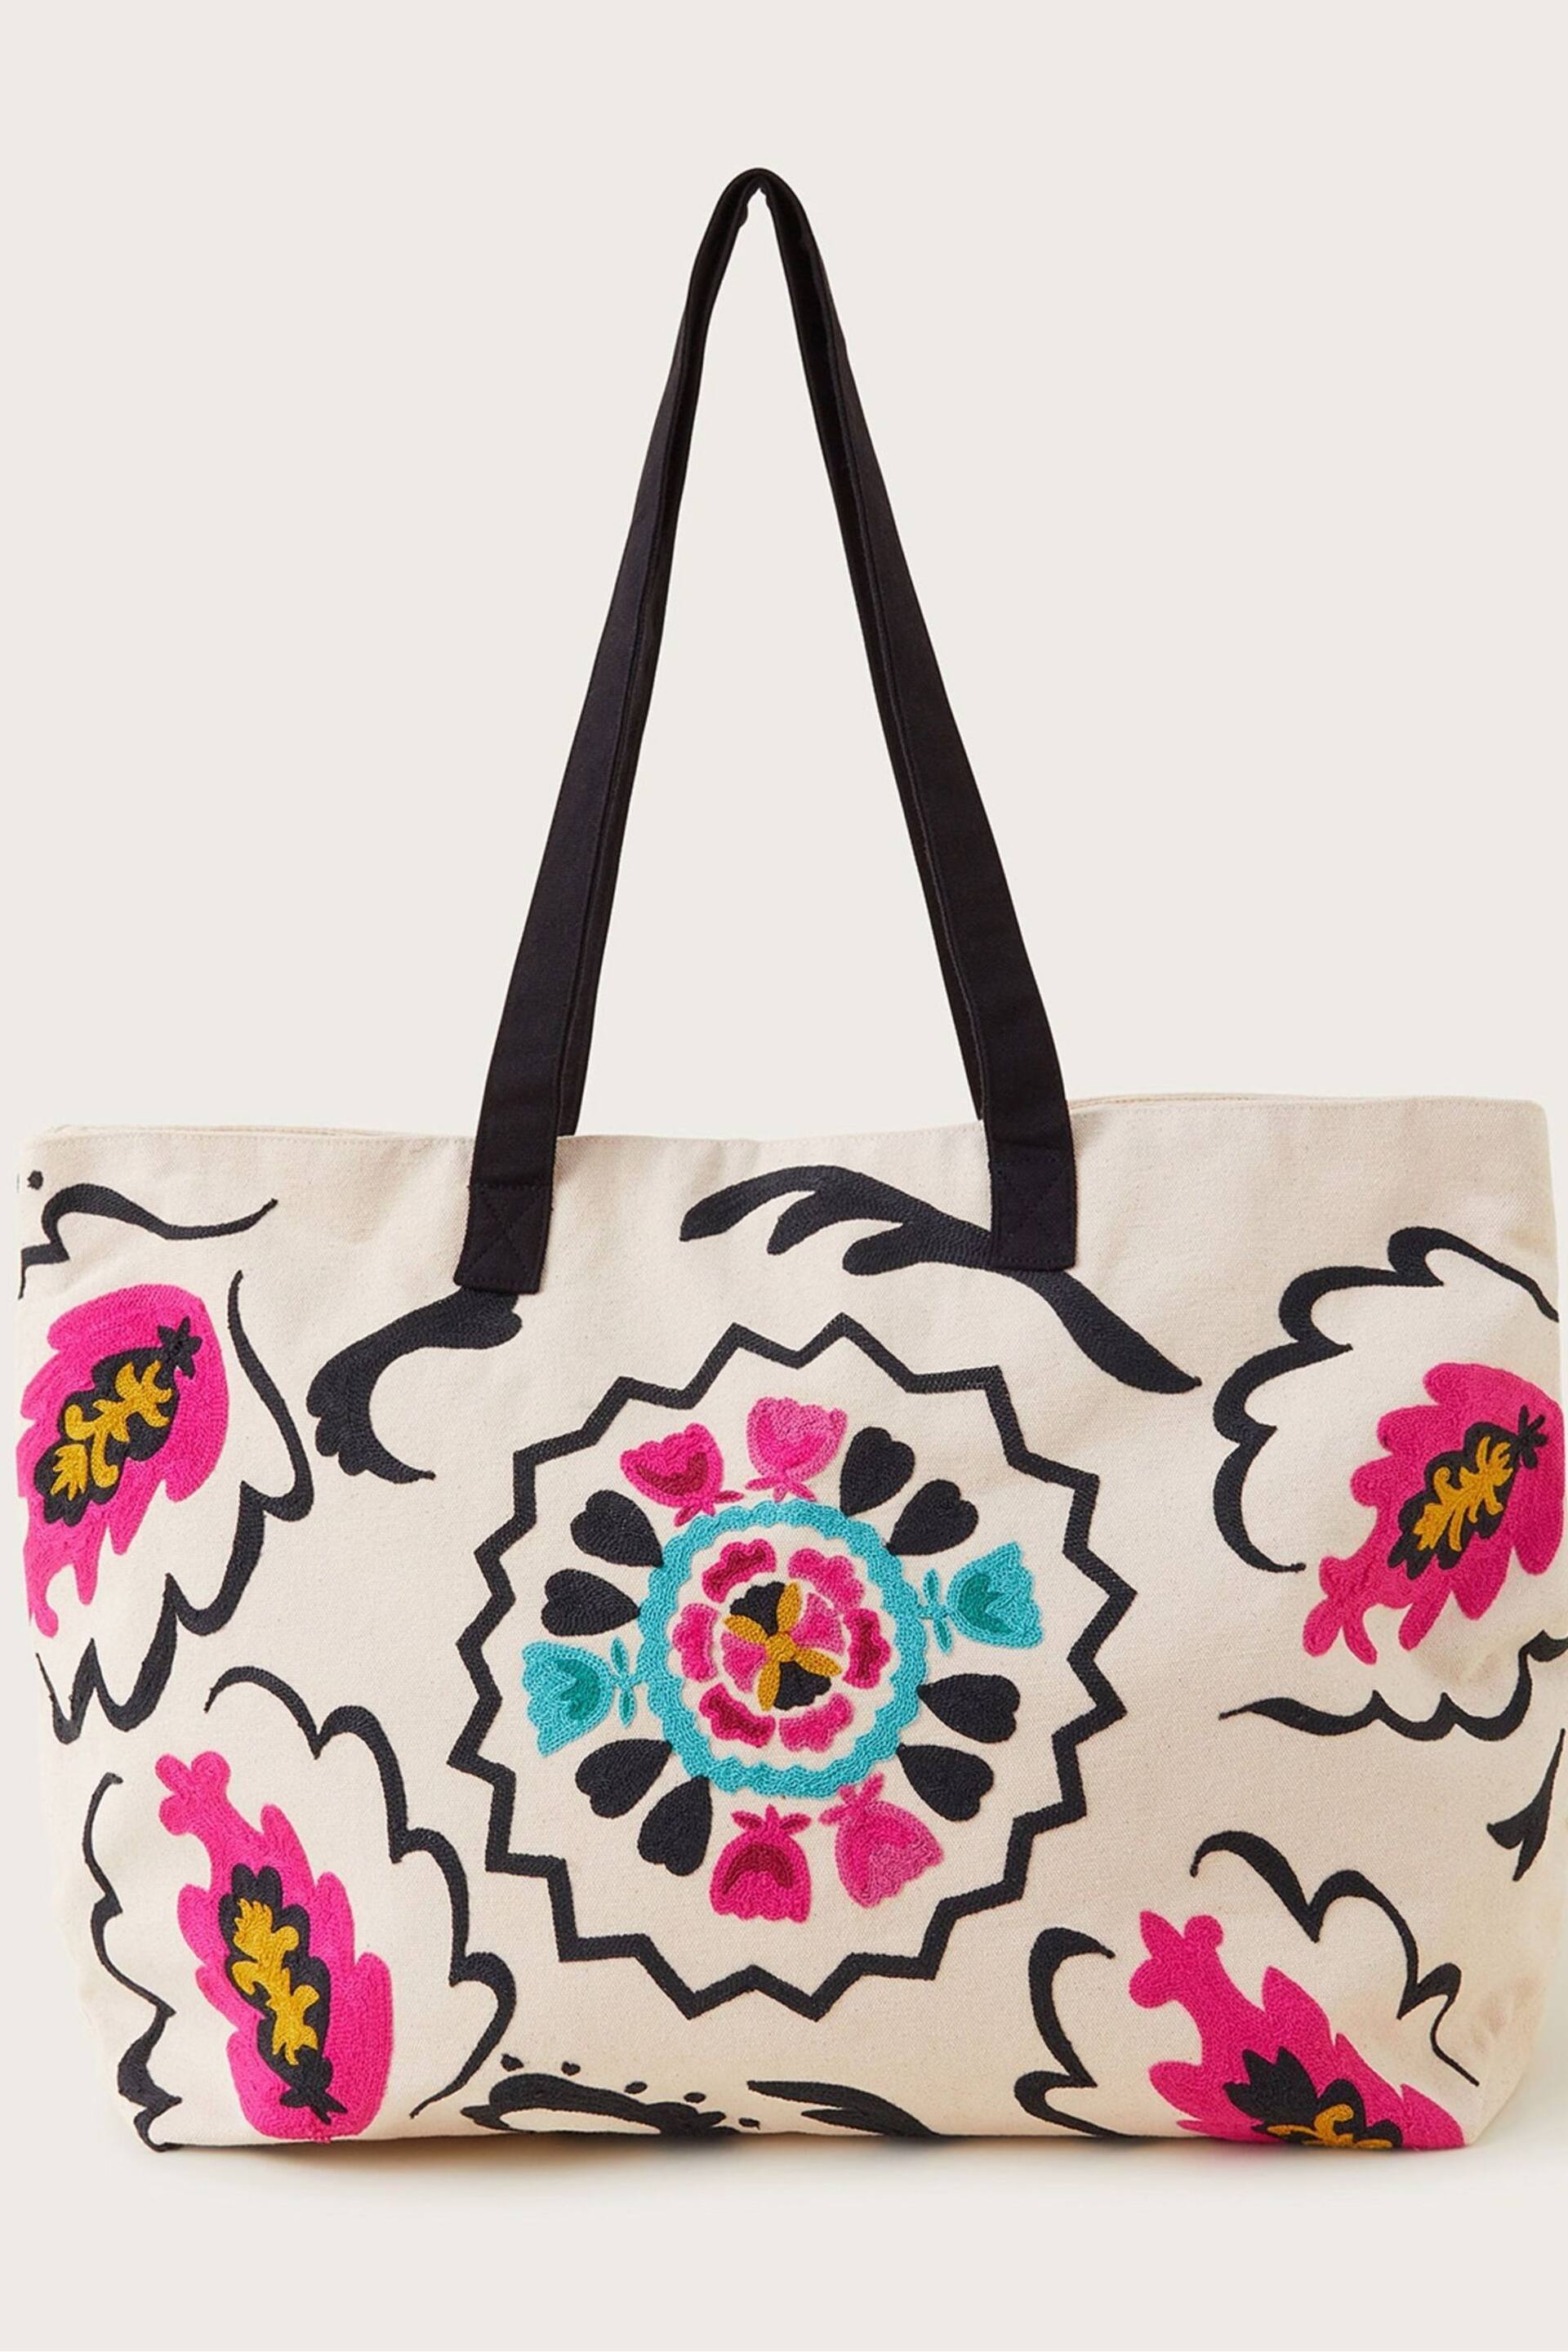 Monsoon Pink Embroidered Beach Bag - Image 2 of 4